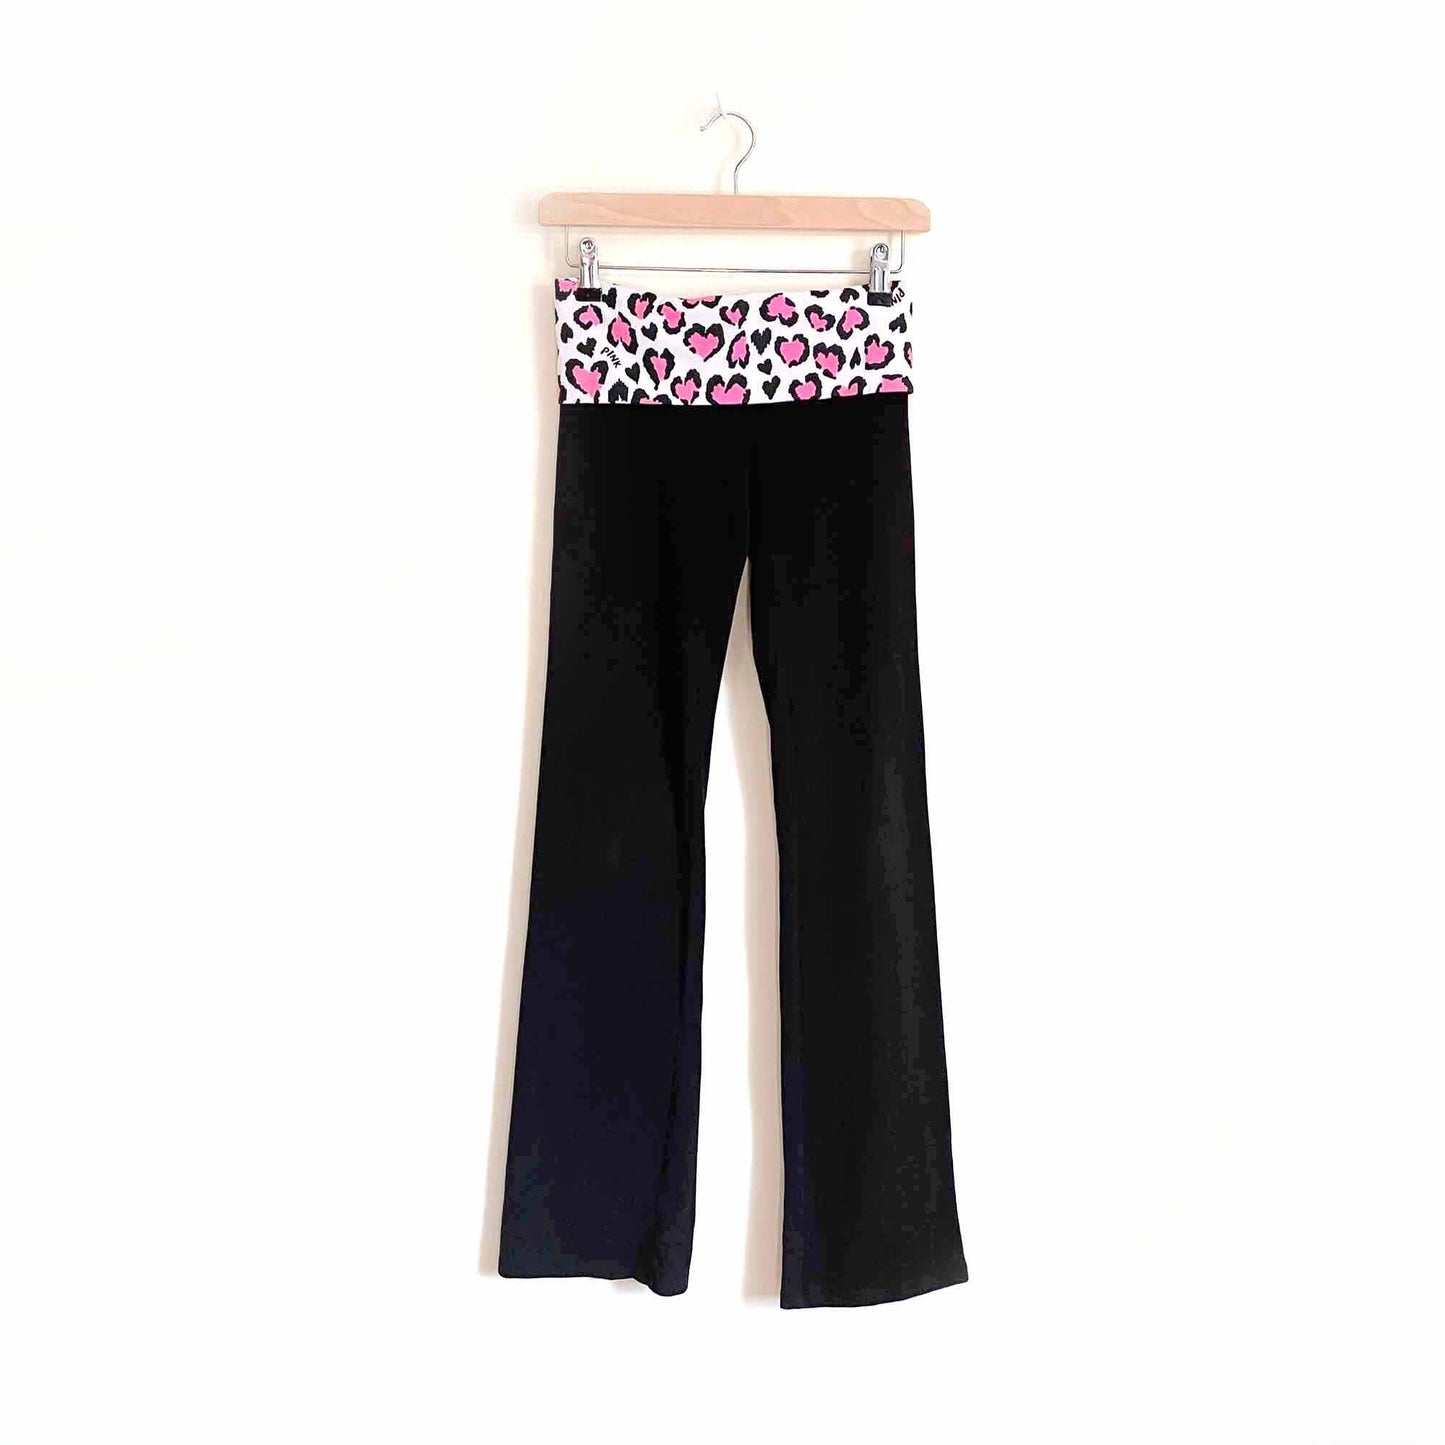 victoria's secret pink foldover incredible yoga flare pants - size xs